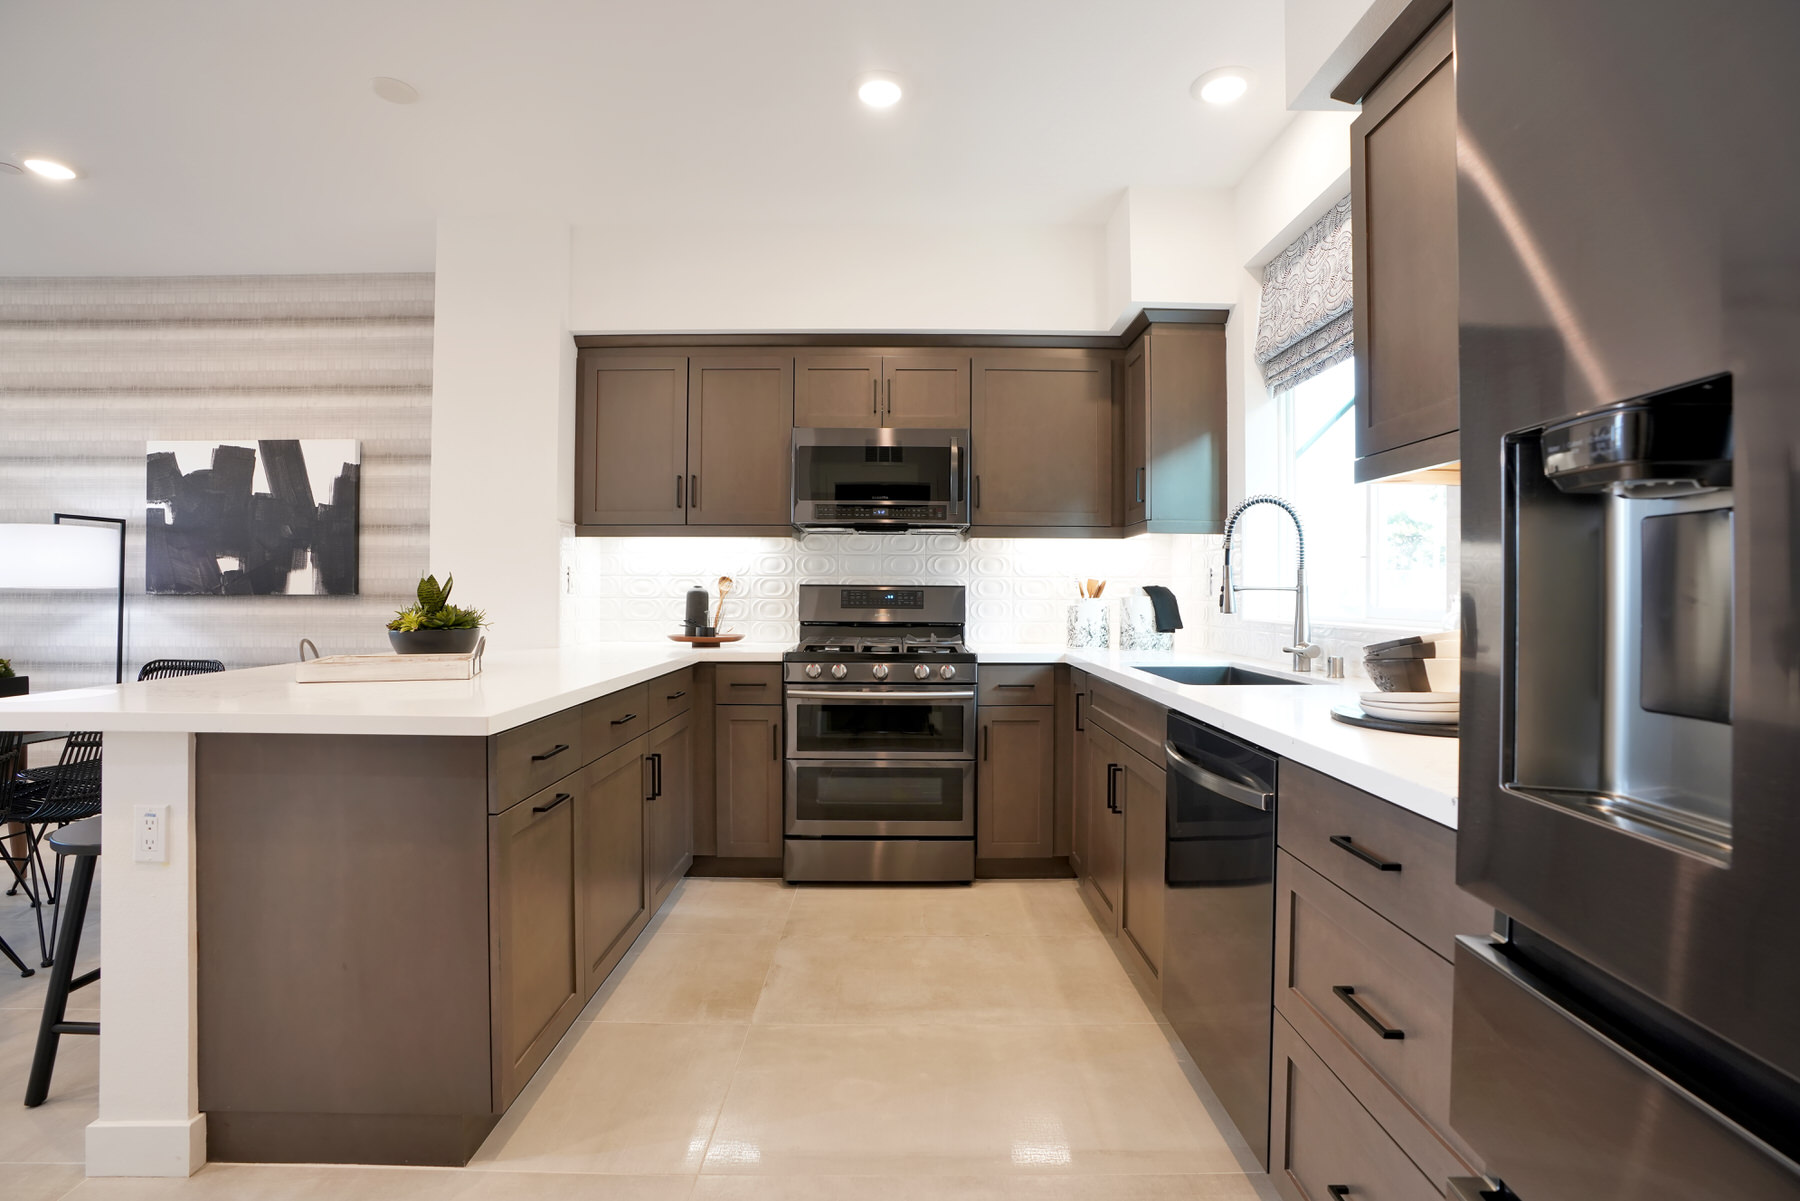 Kitchen in Plan 1 at Townes at Magnolia by Melia Homes in Anaheim, CA